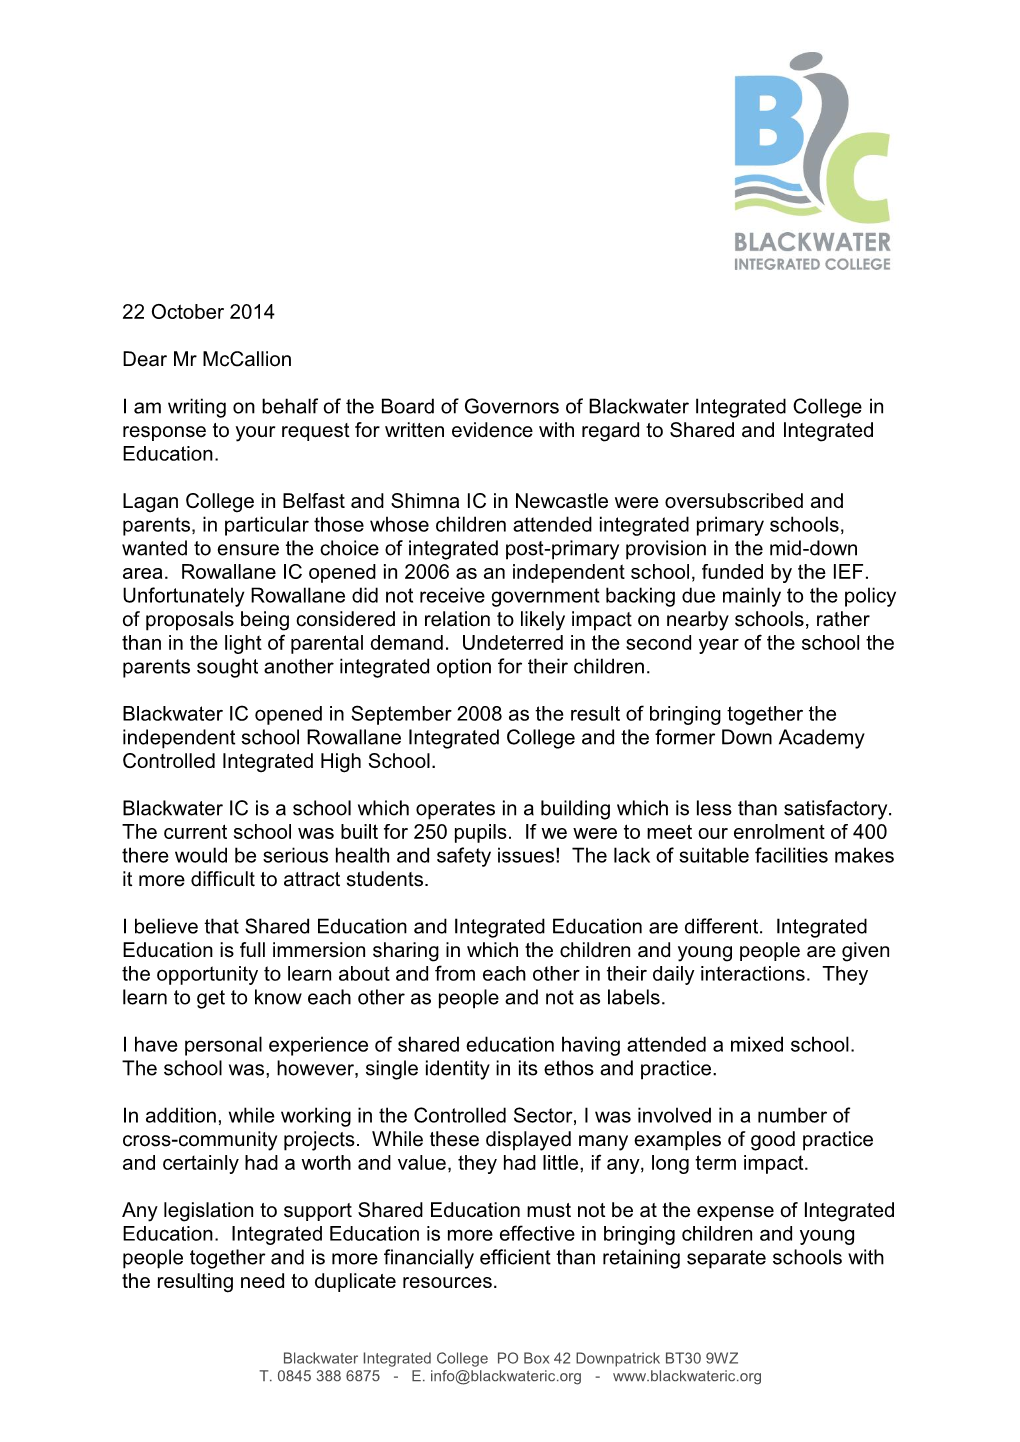 Blackwater Integrated College in Response to Your Request for Written Evidence with Regard to Shared and Integrated Education